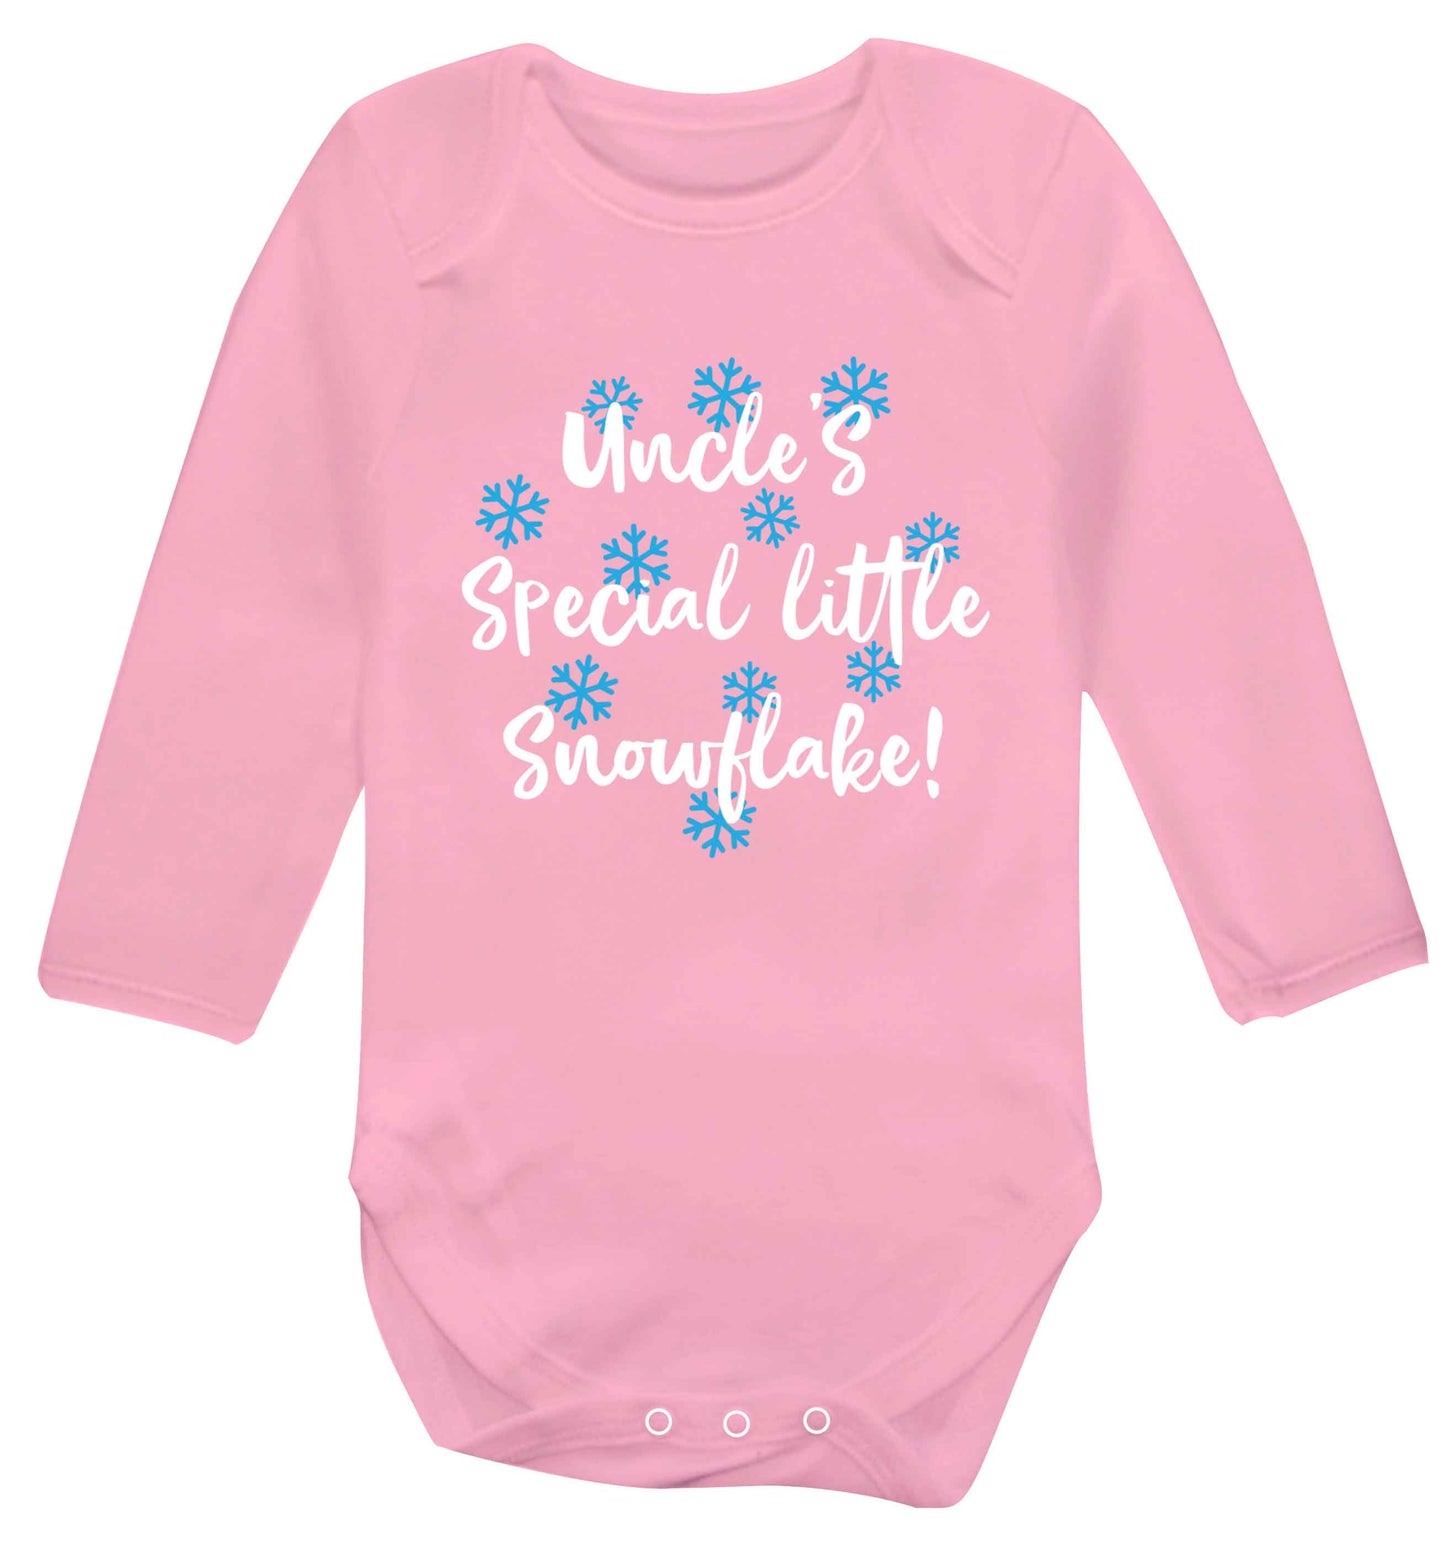 Uncle's special little snowflake Baby Vest long sleeved pale pink 6-12 months